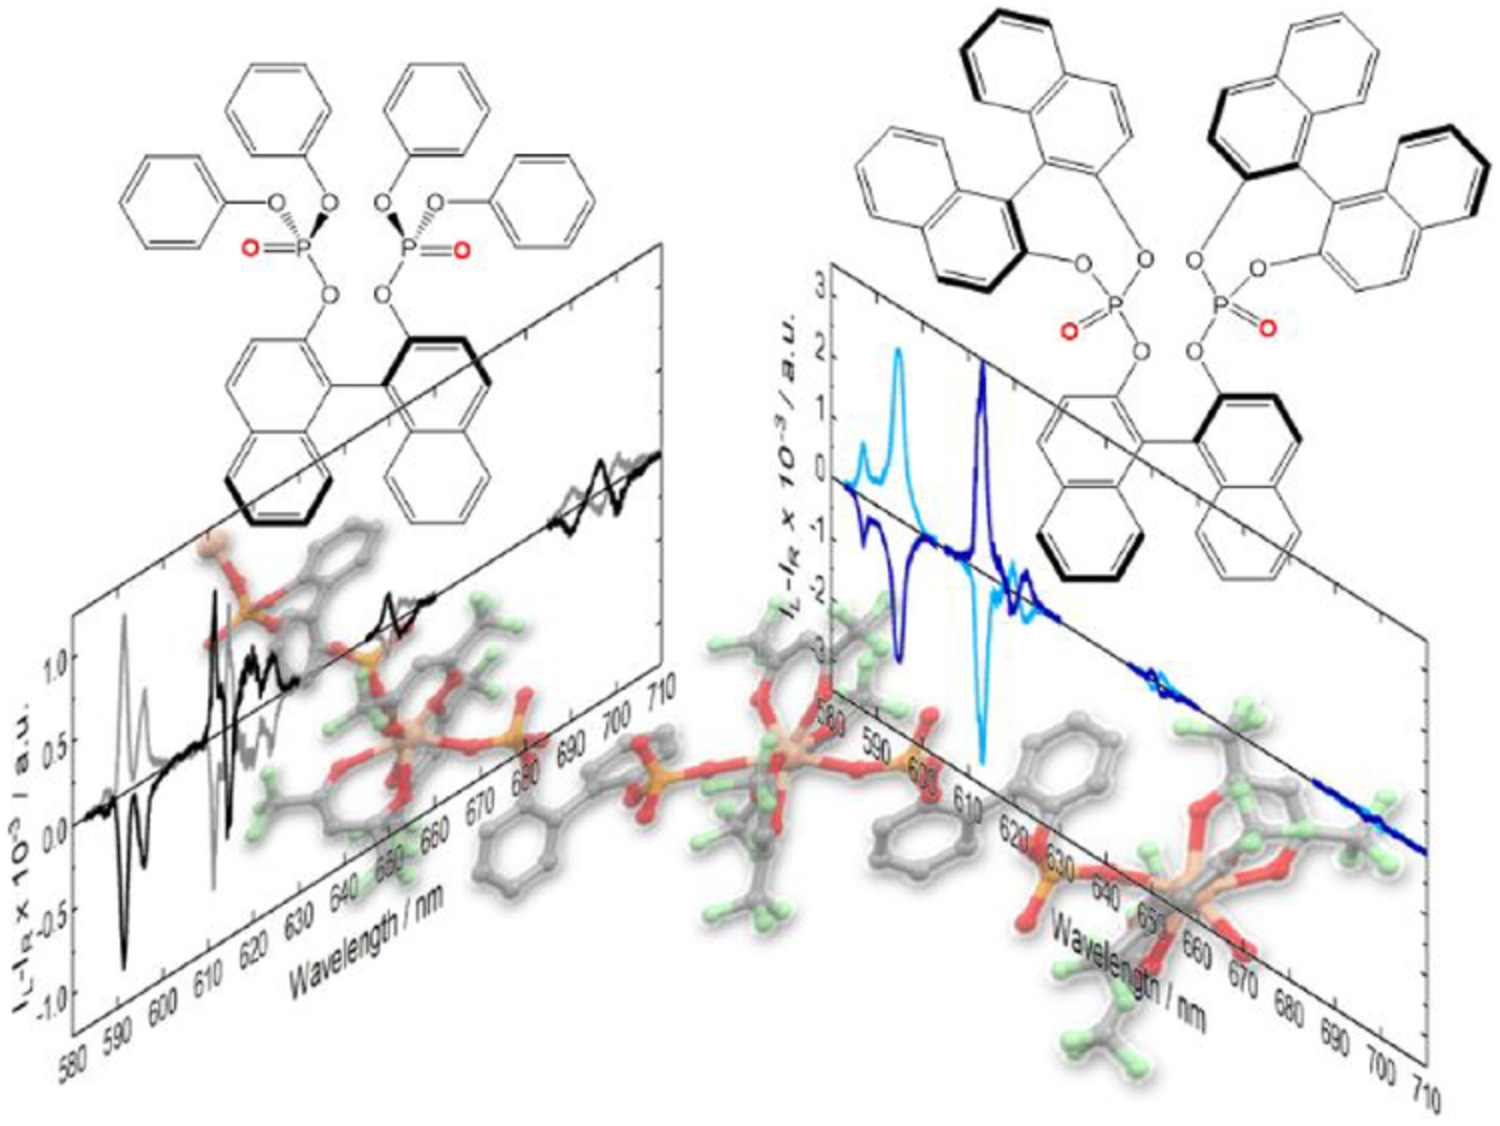 Circularly polarized luminescence of Eu(III) complexes with chiral 1,1′‐bi‐2‐naphtol‐derived bisphosphate ligands